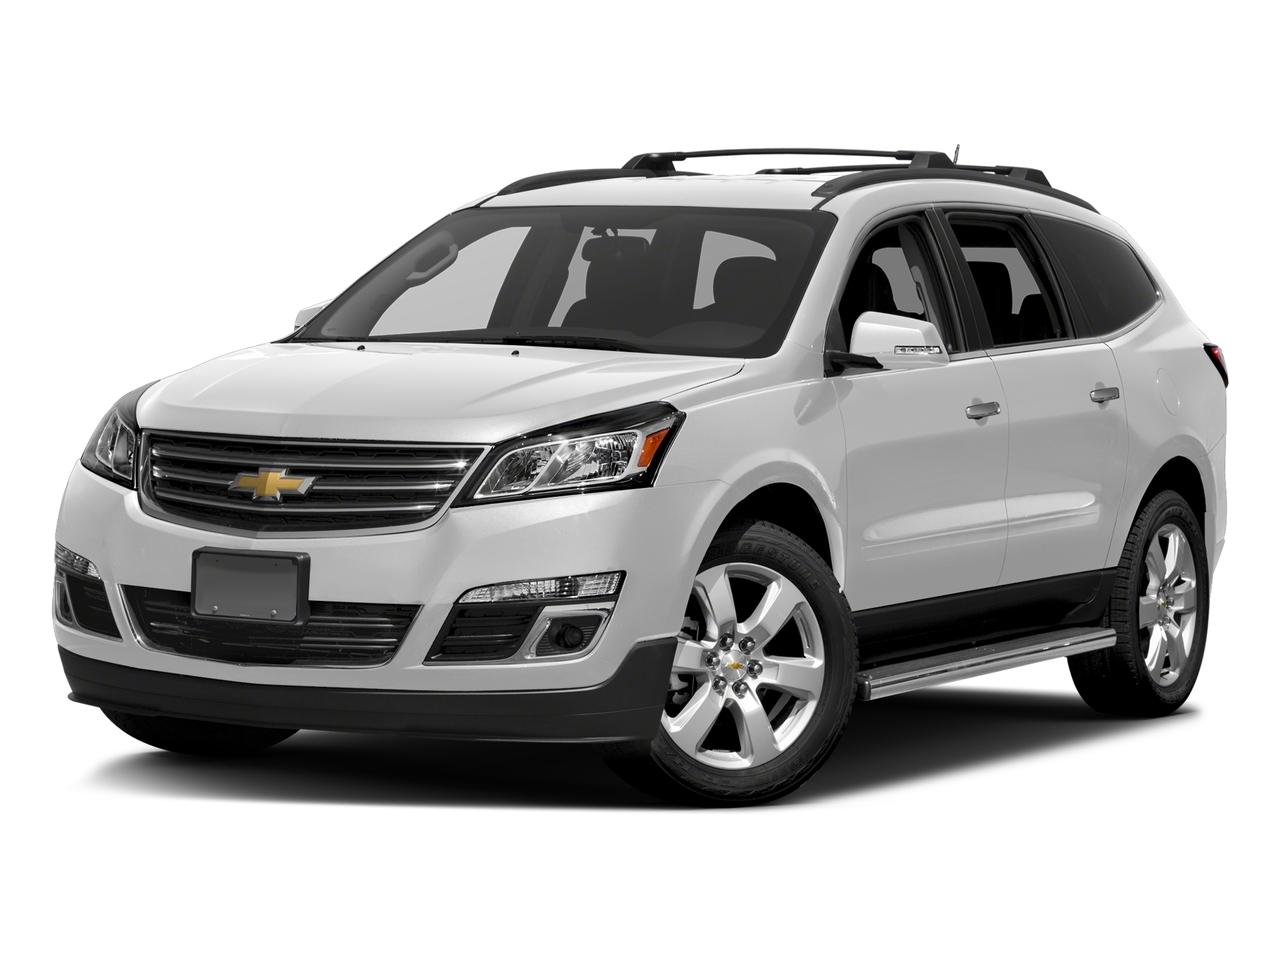 2017 Chevrolet Traverse Vehicle Photo in Saint Charles, IL 60174